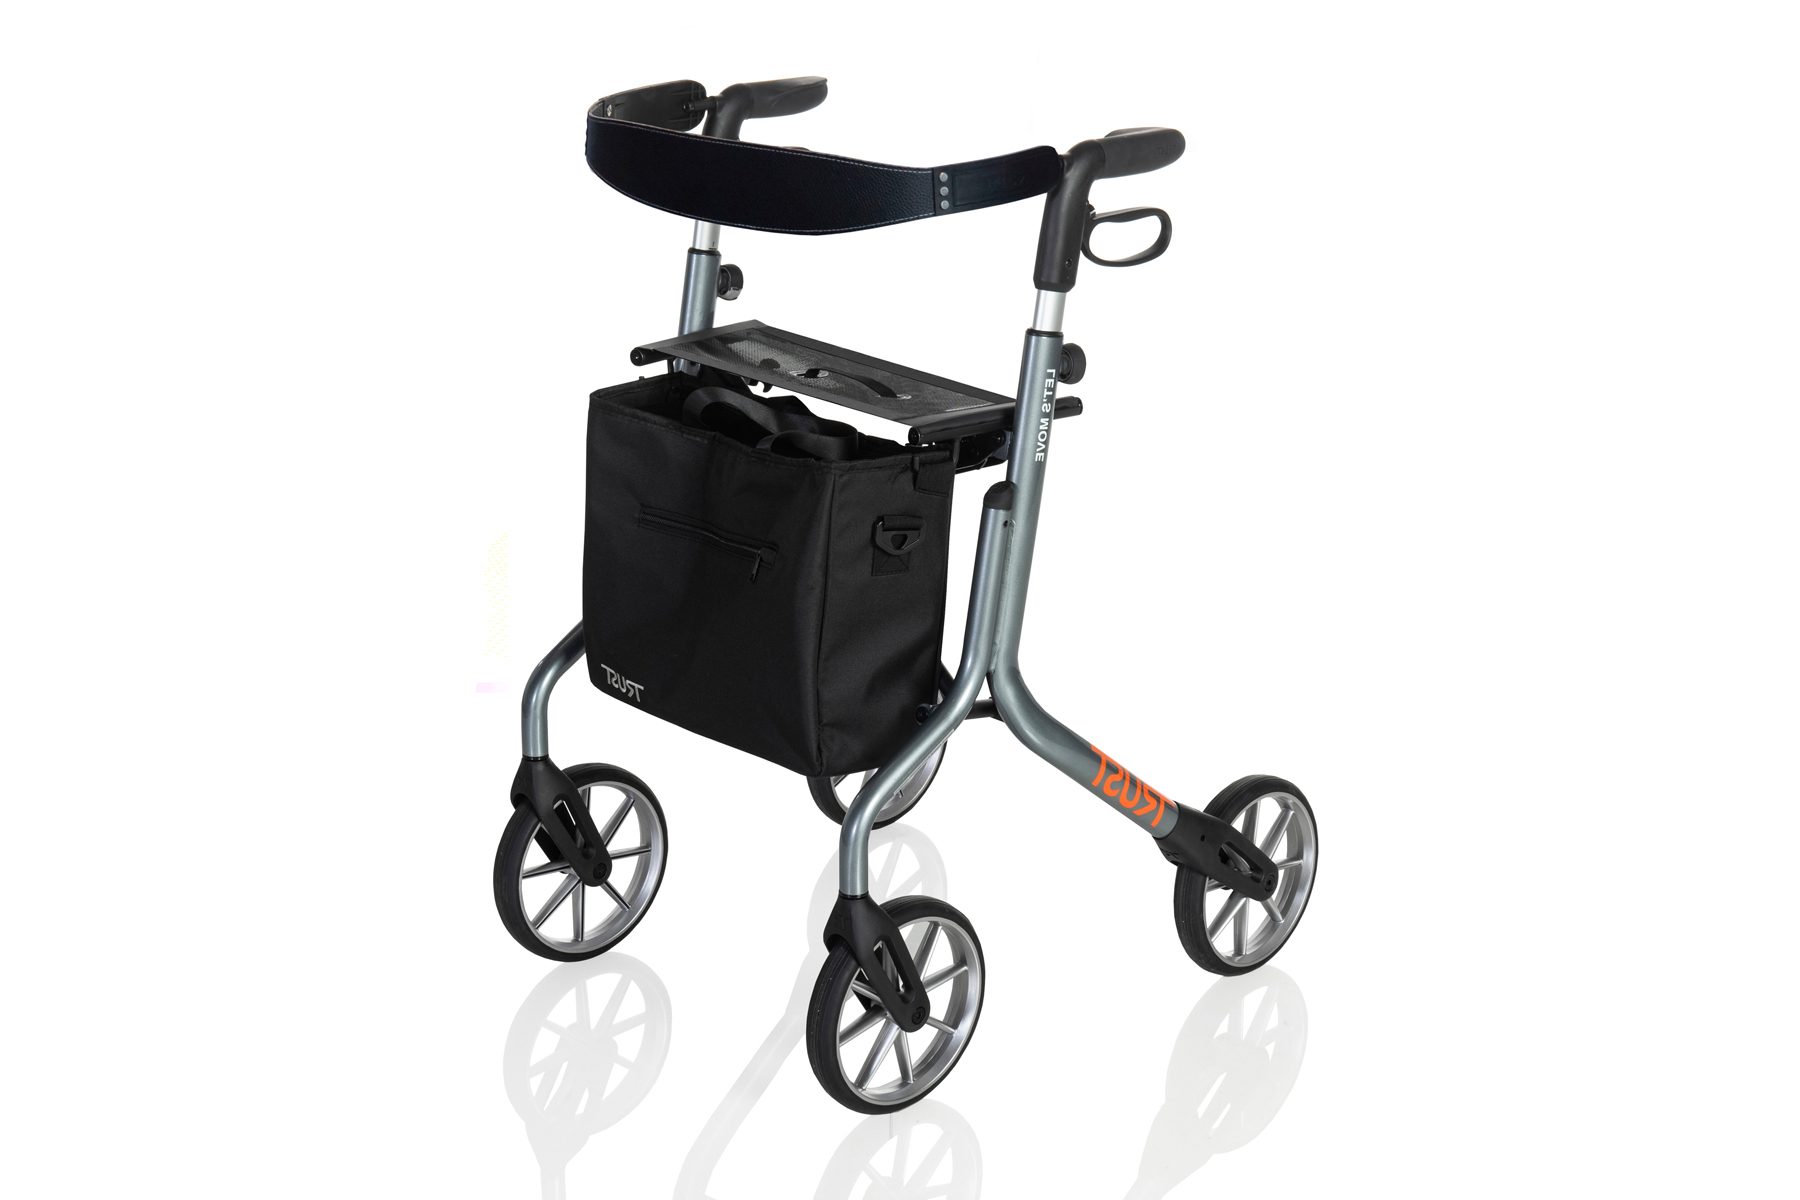 Let's Move Rollator - Trust Care Walker with Seat